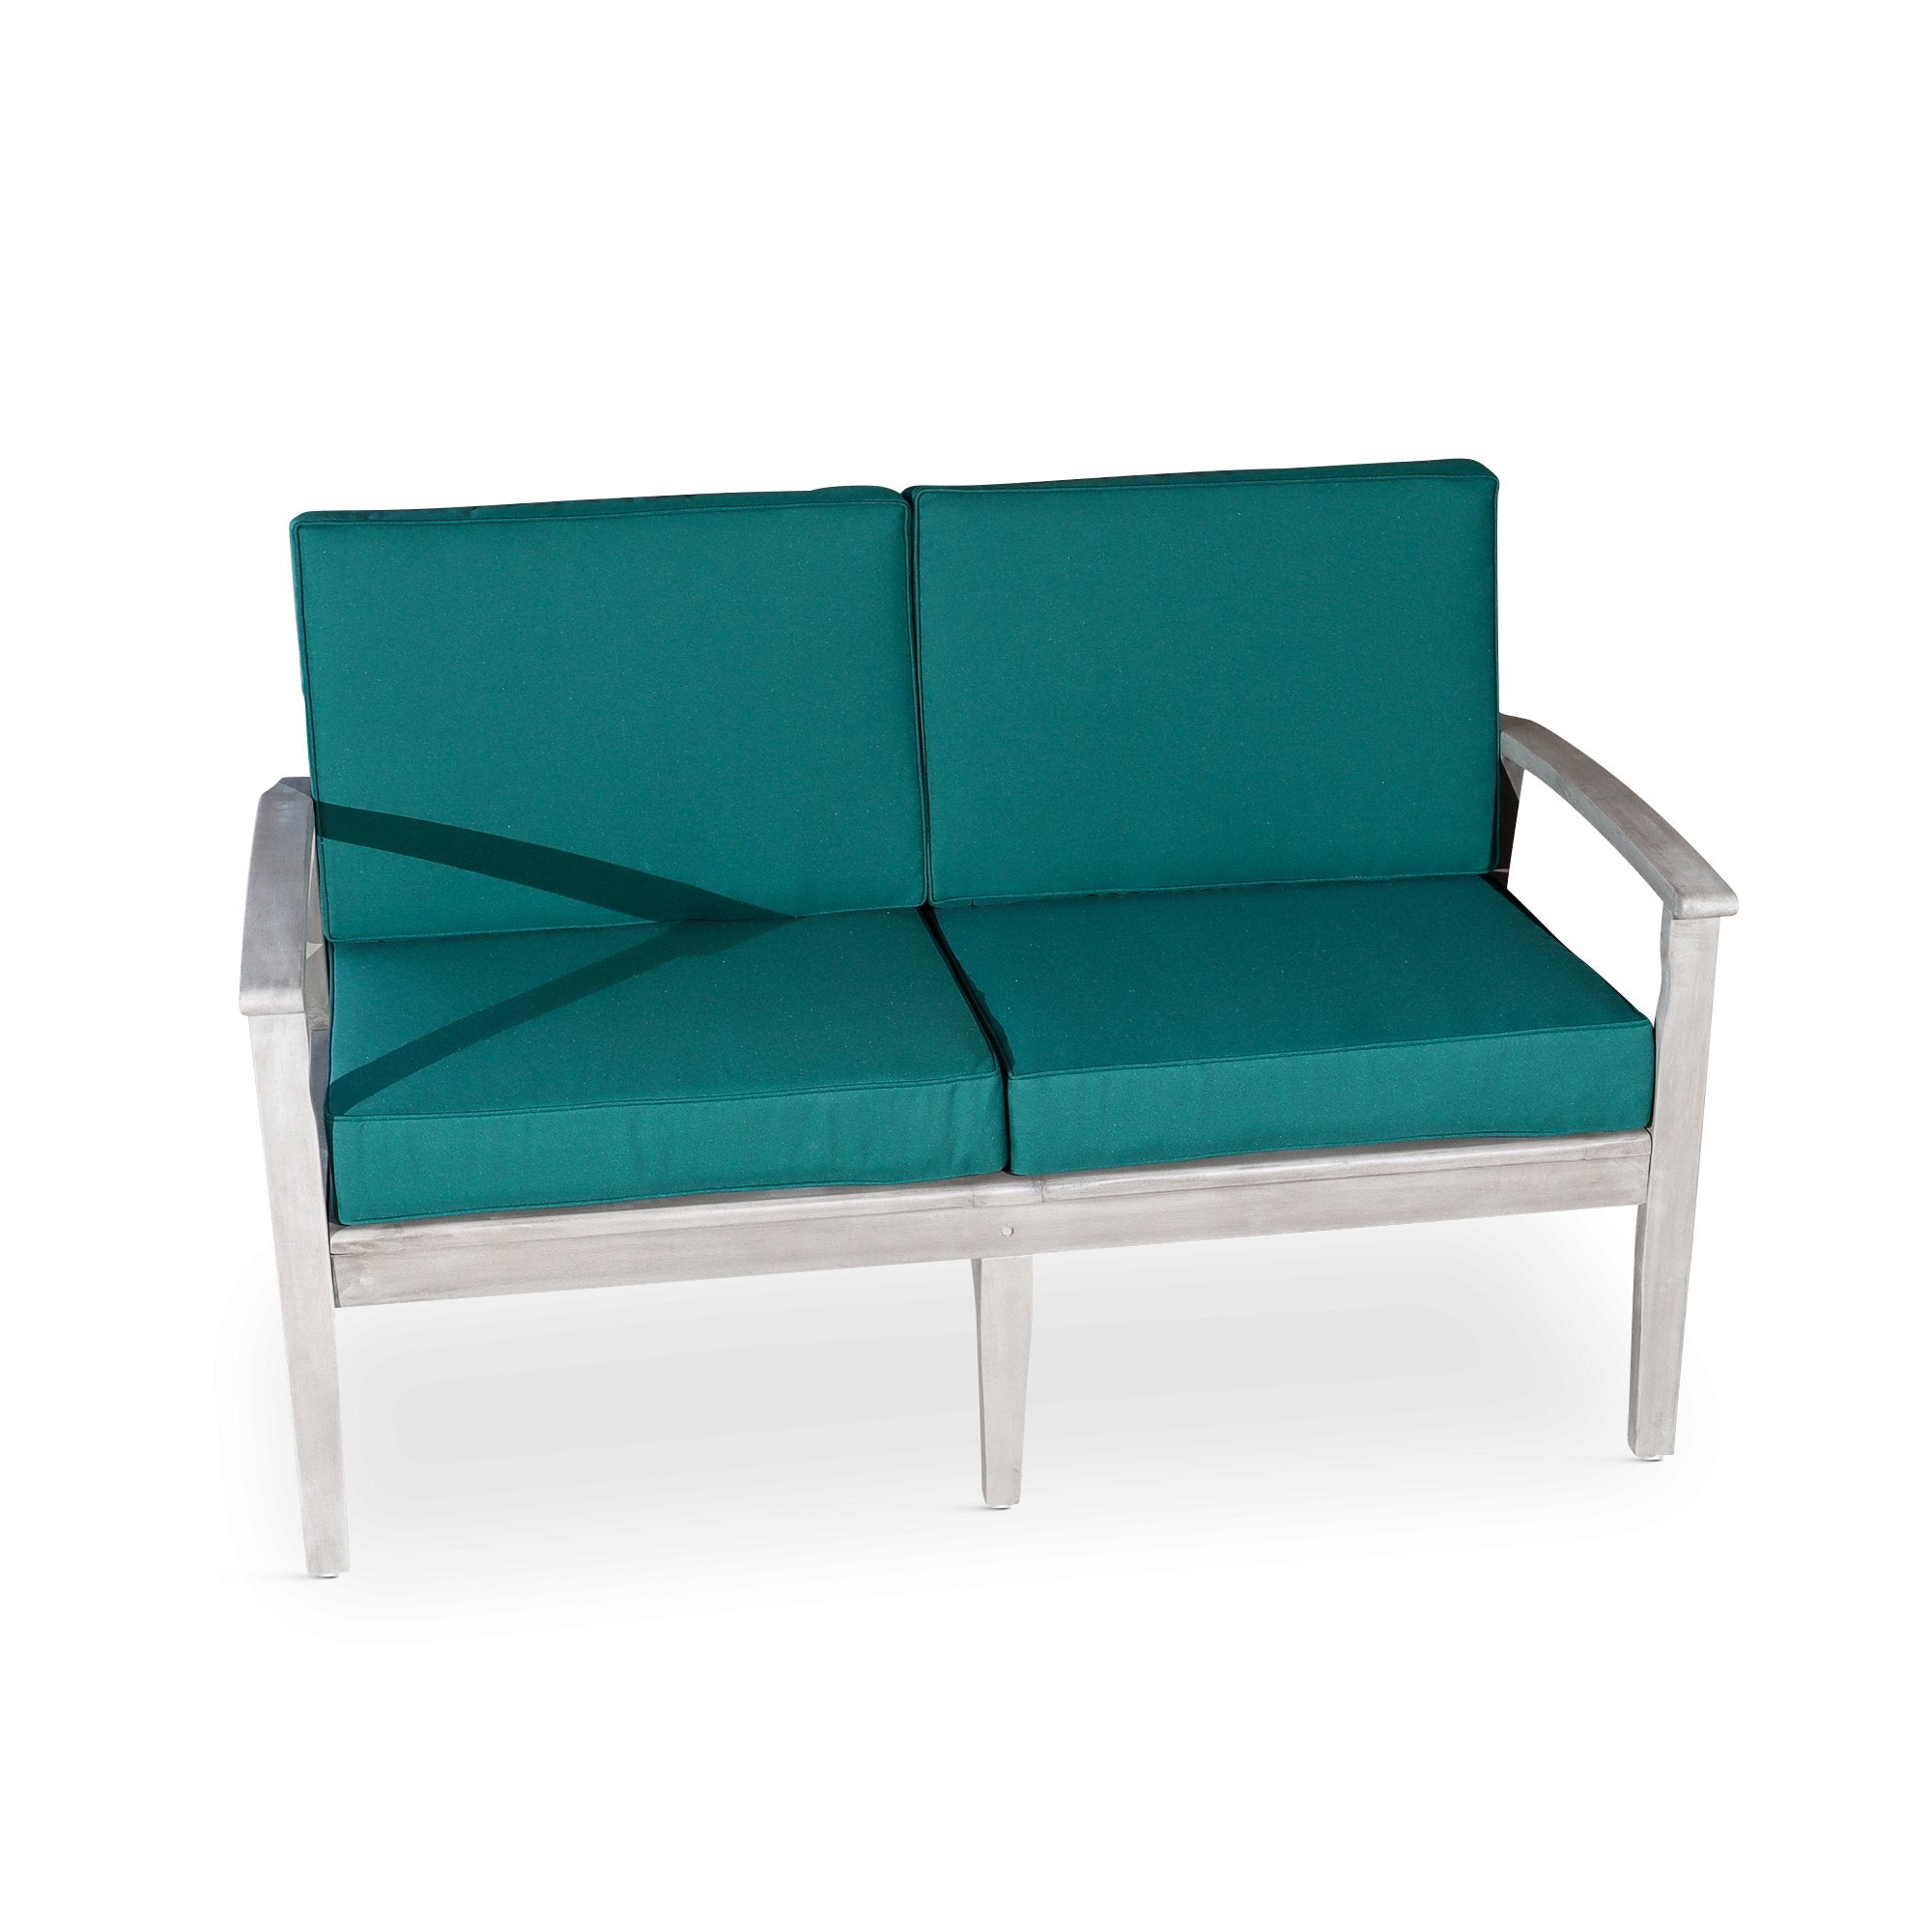 Outdoor Loveseat with Cushions, Silver Gray Finish, Dark Green Cushions - Tuesday Morning-Chairs & Seating